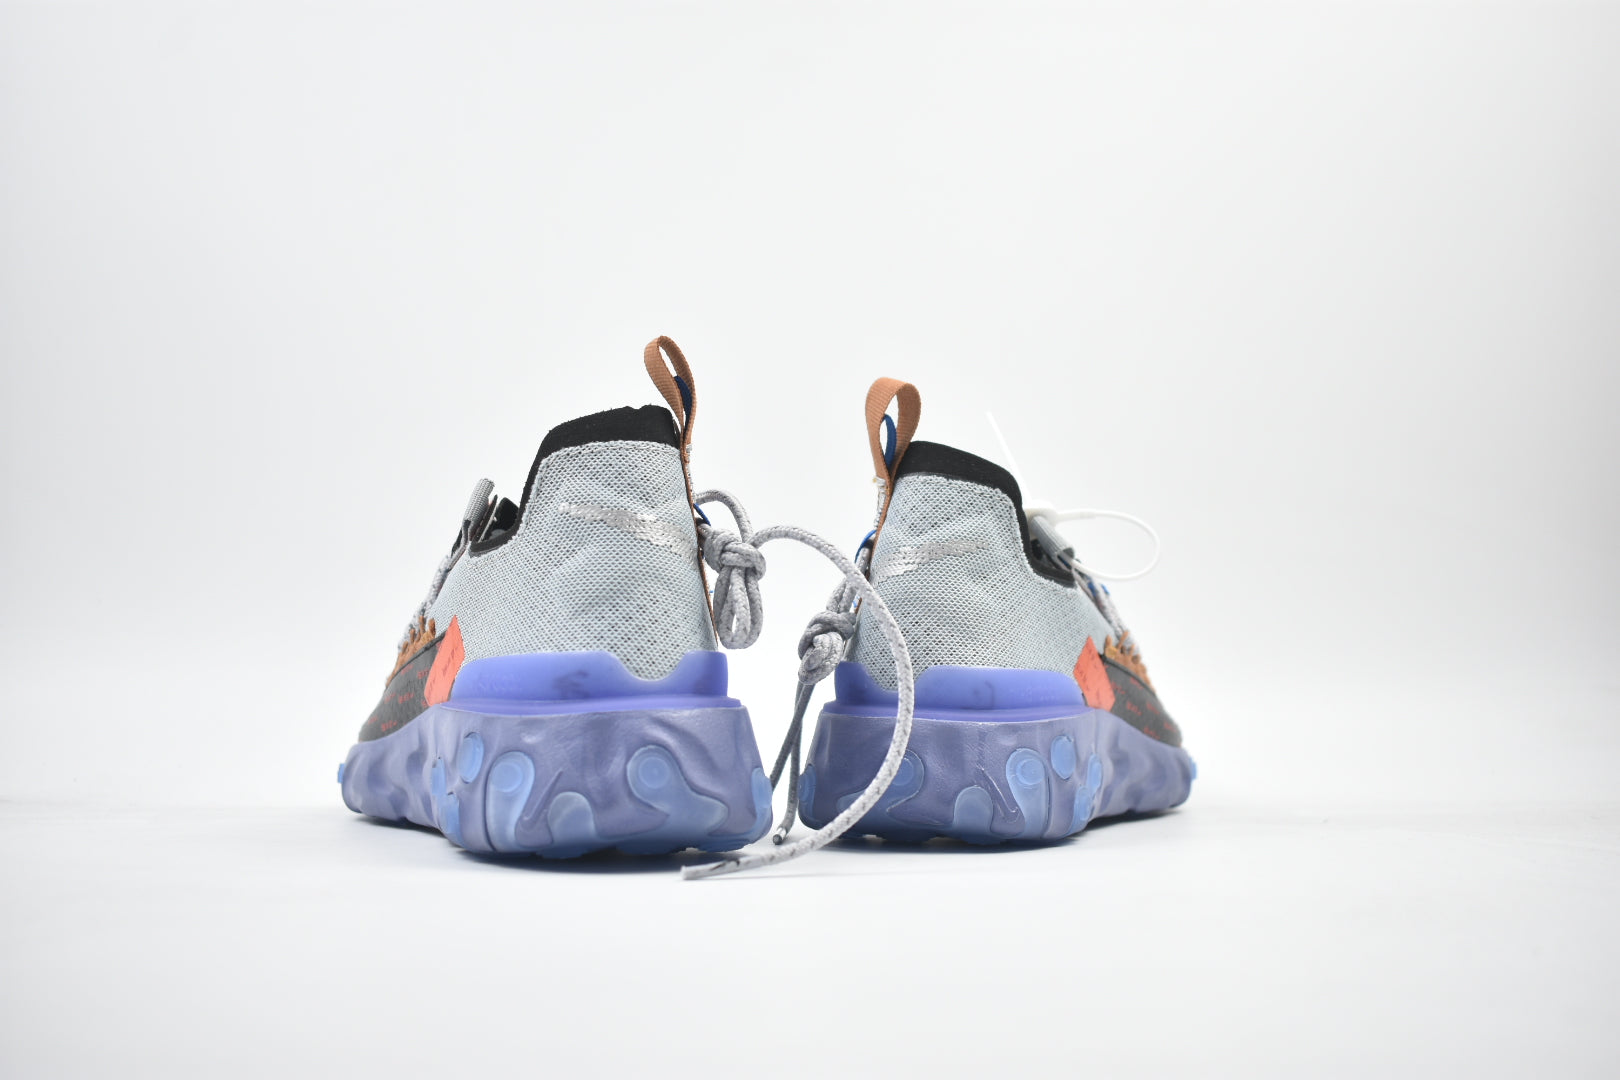 React Element Wr Ispa - whatever on 